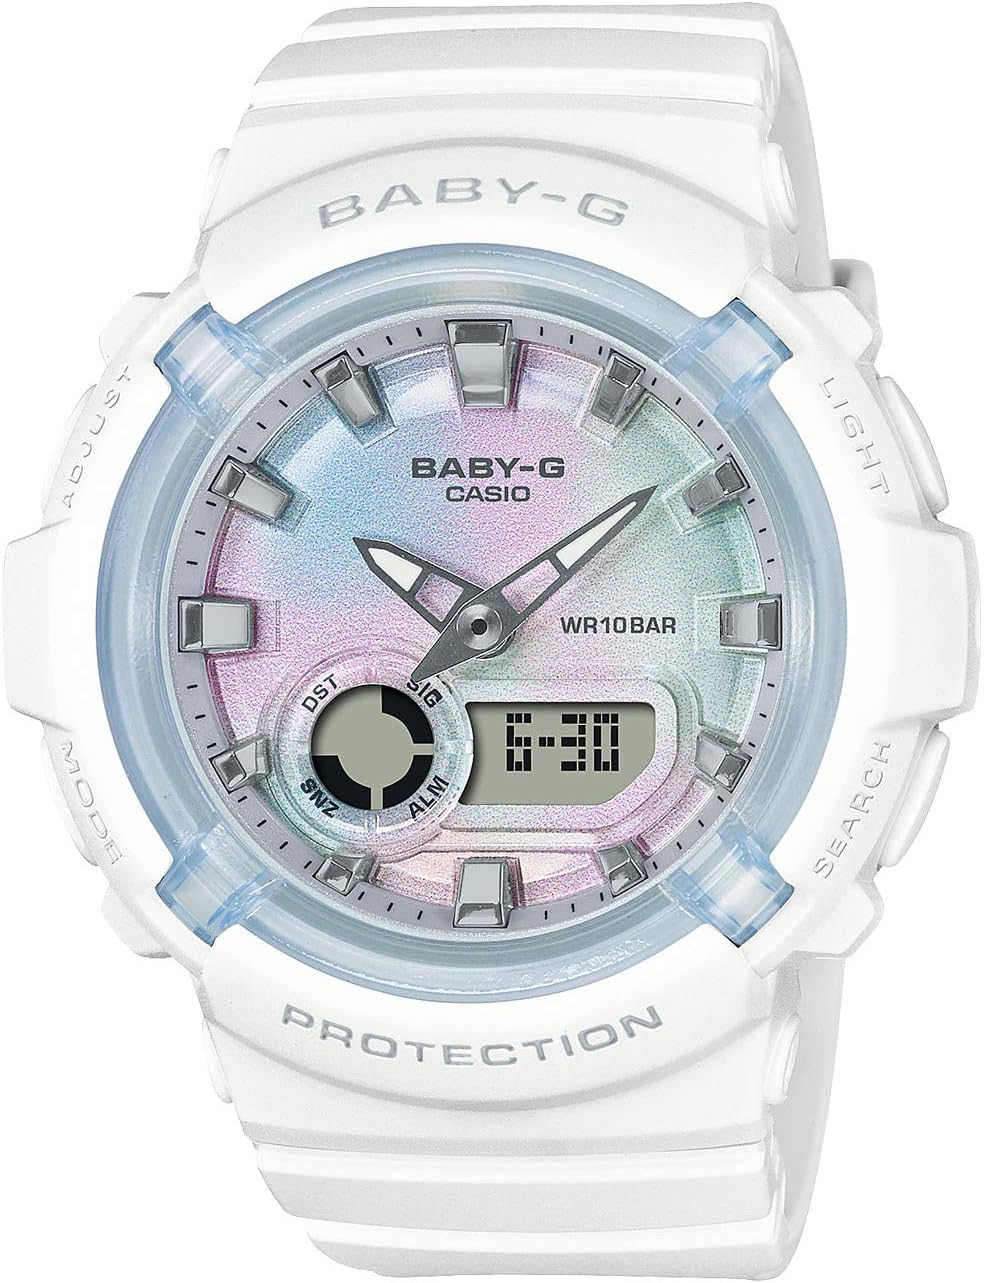 Review Summary of Casio] Watch Baby-G [Japan Import] BGA-280-7AJF White